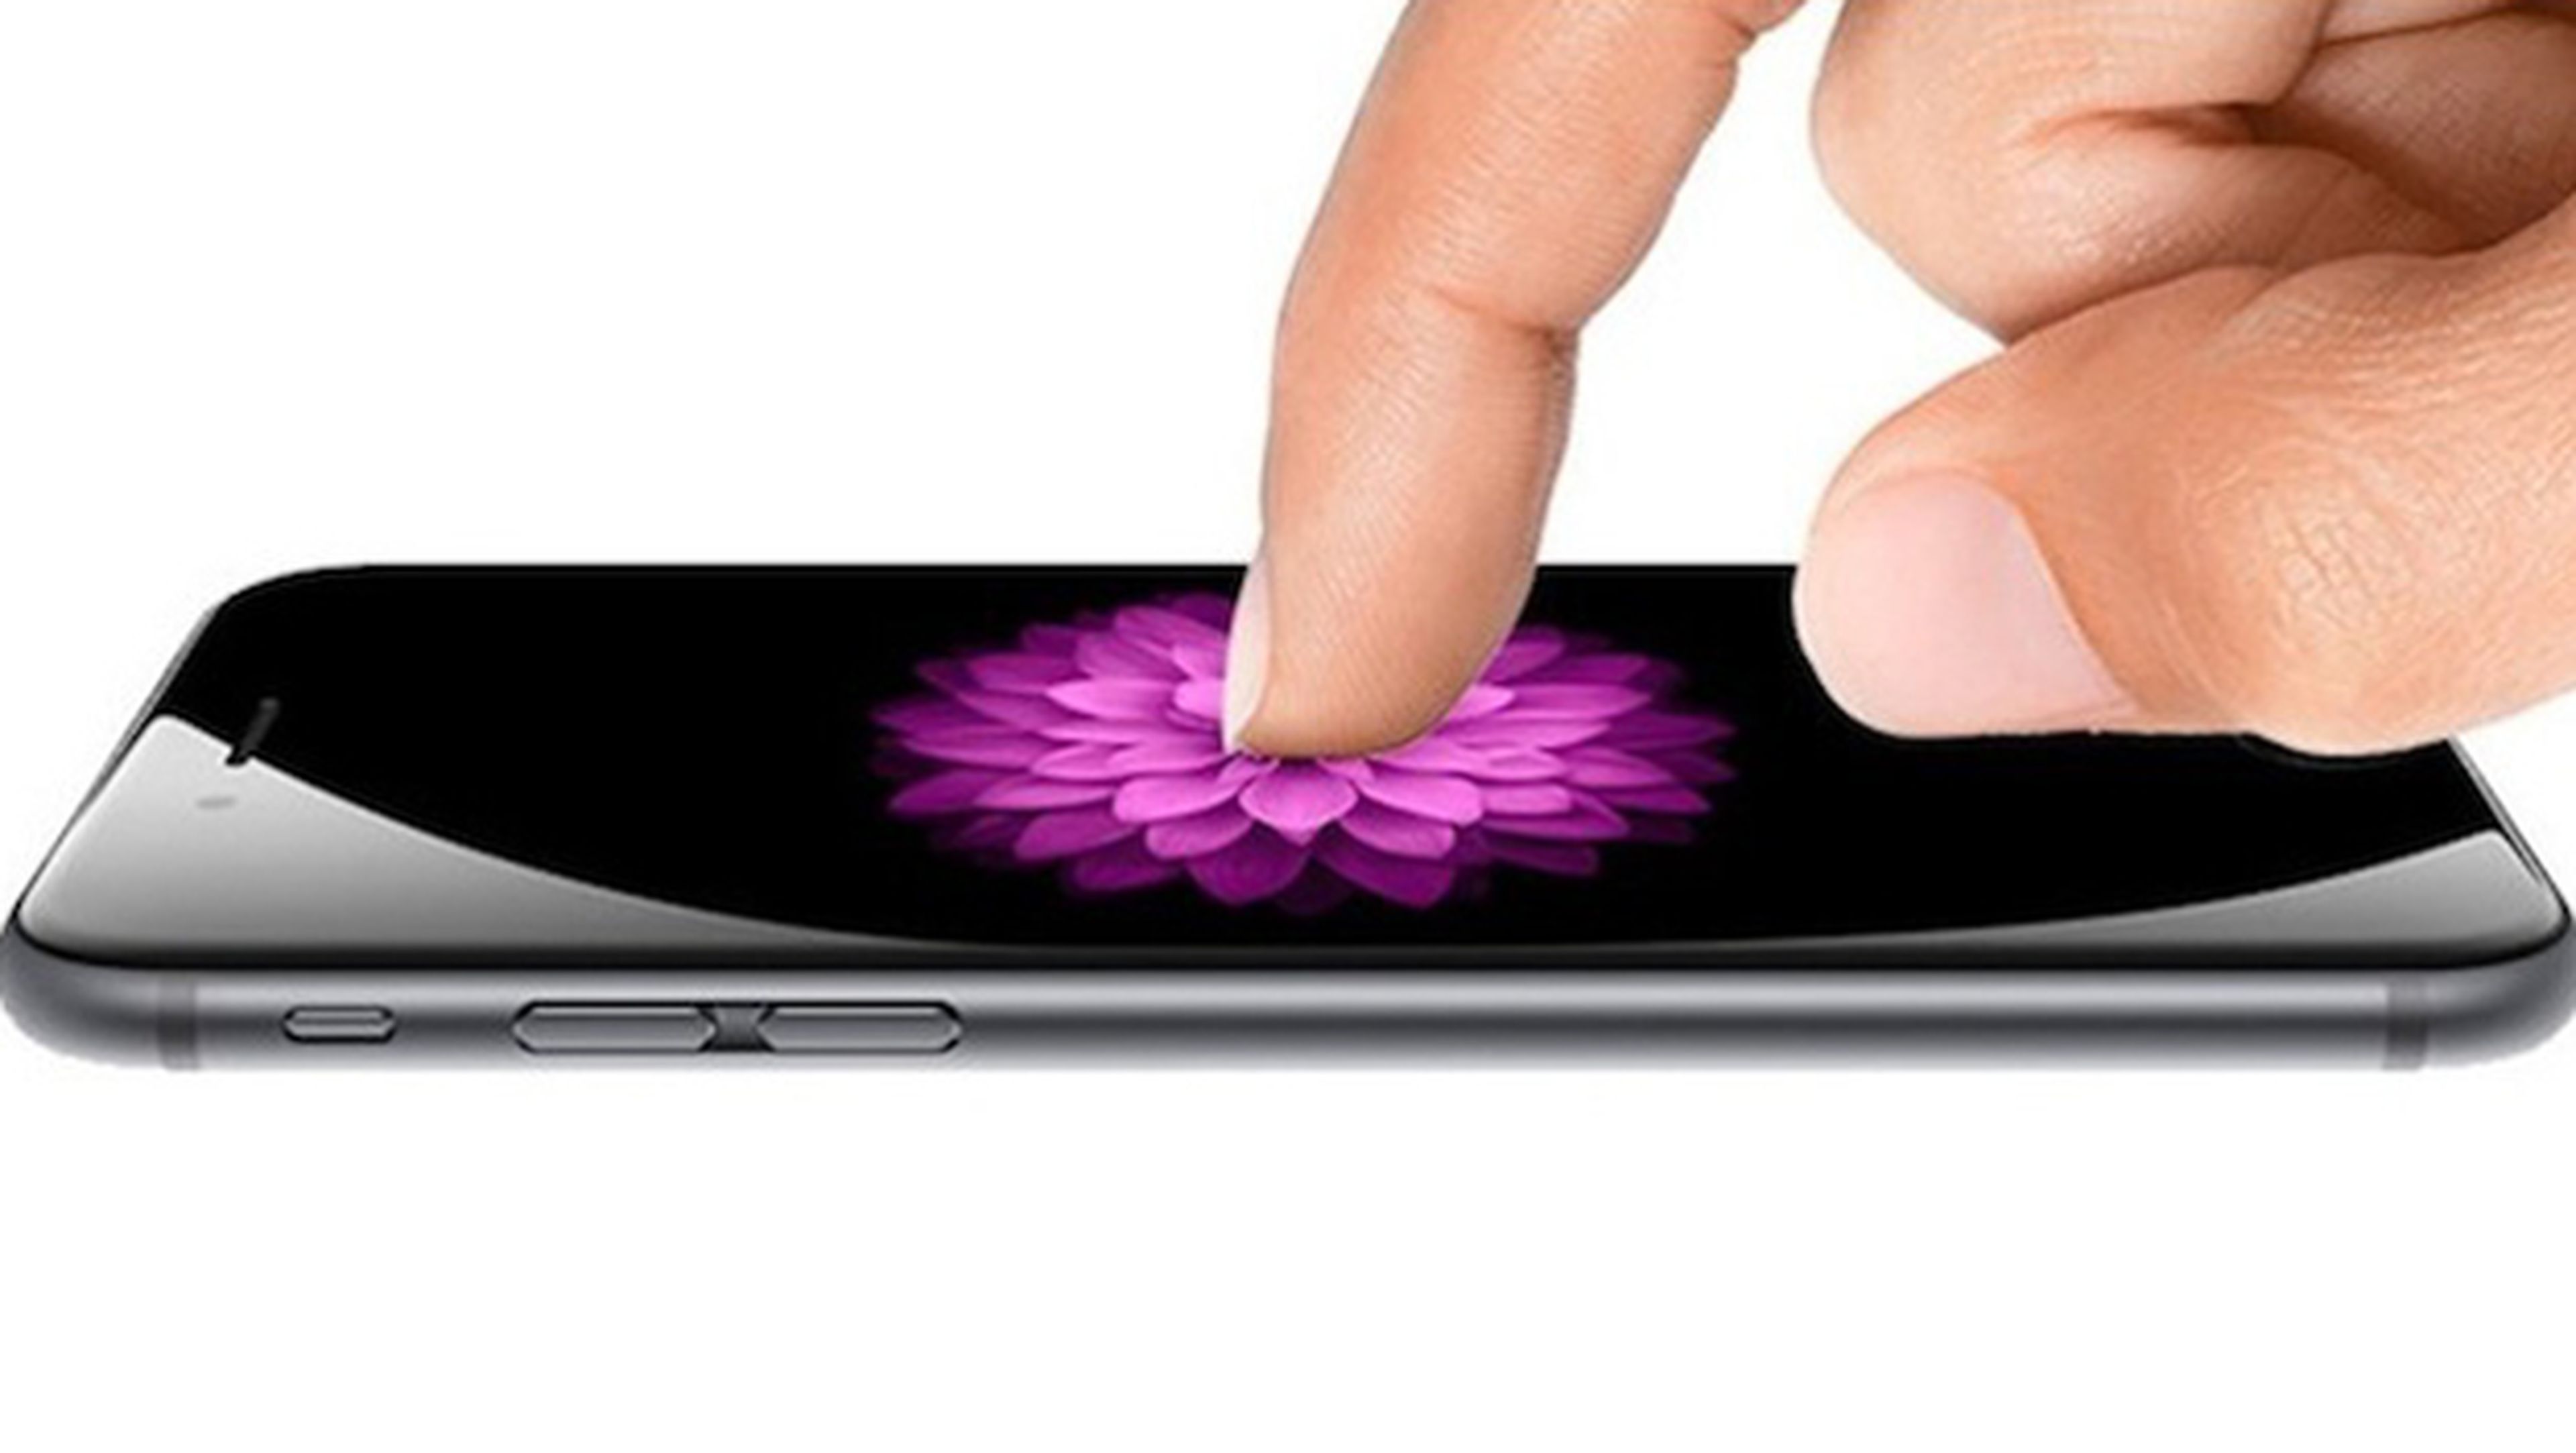 iphone force touch